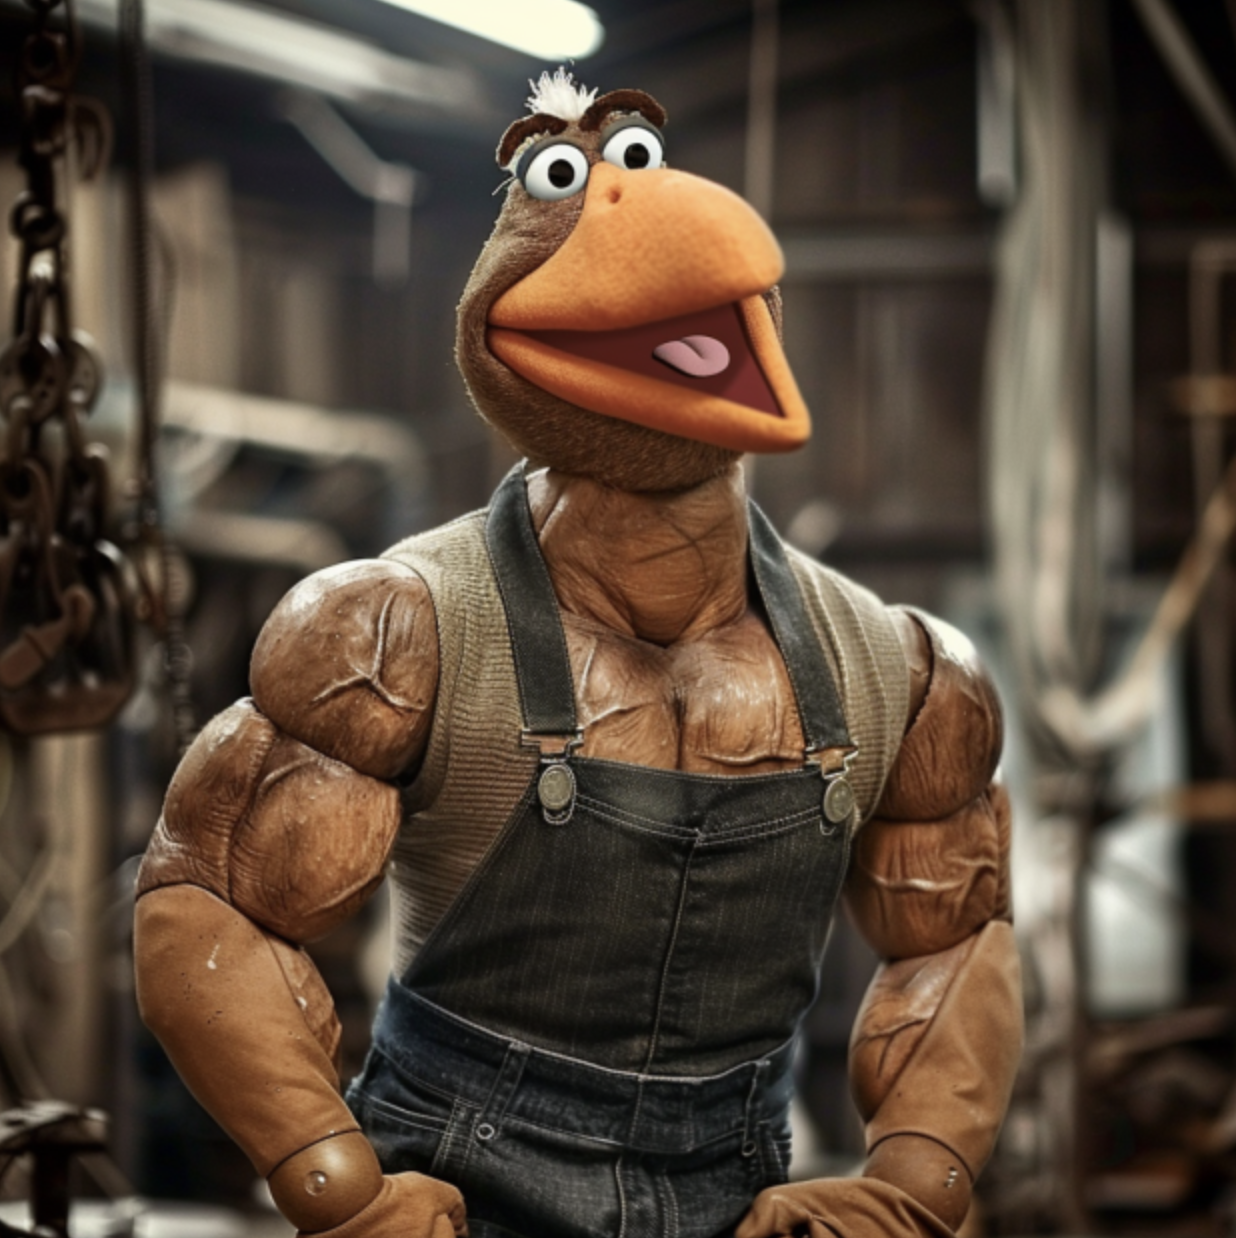 Muppet character with exaggerated muscular arms and torso wearing overalls